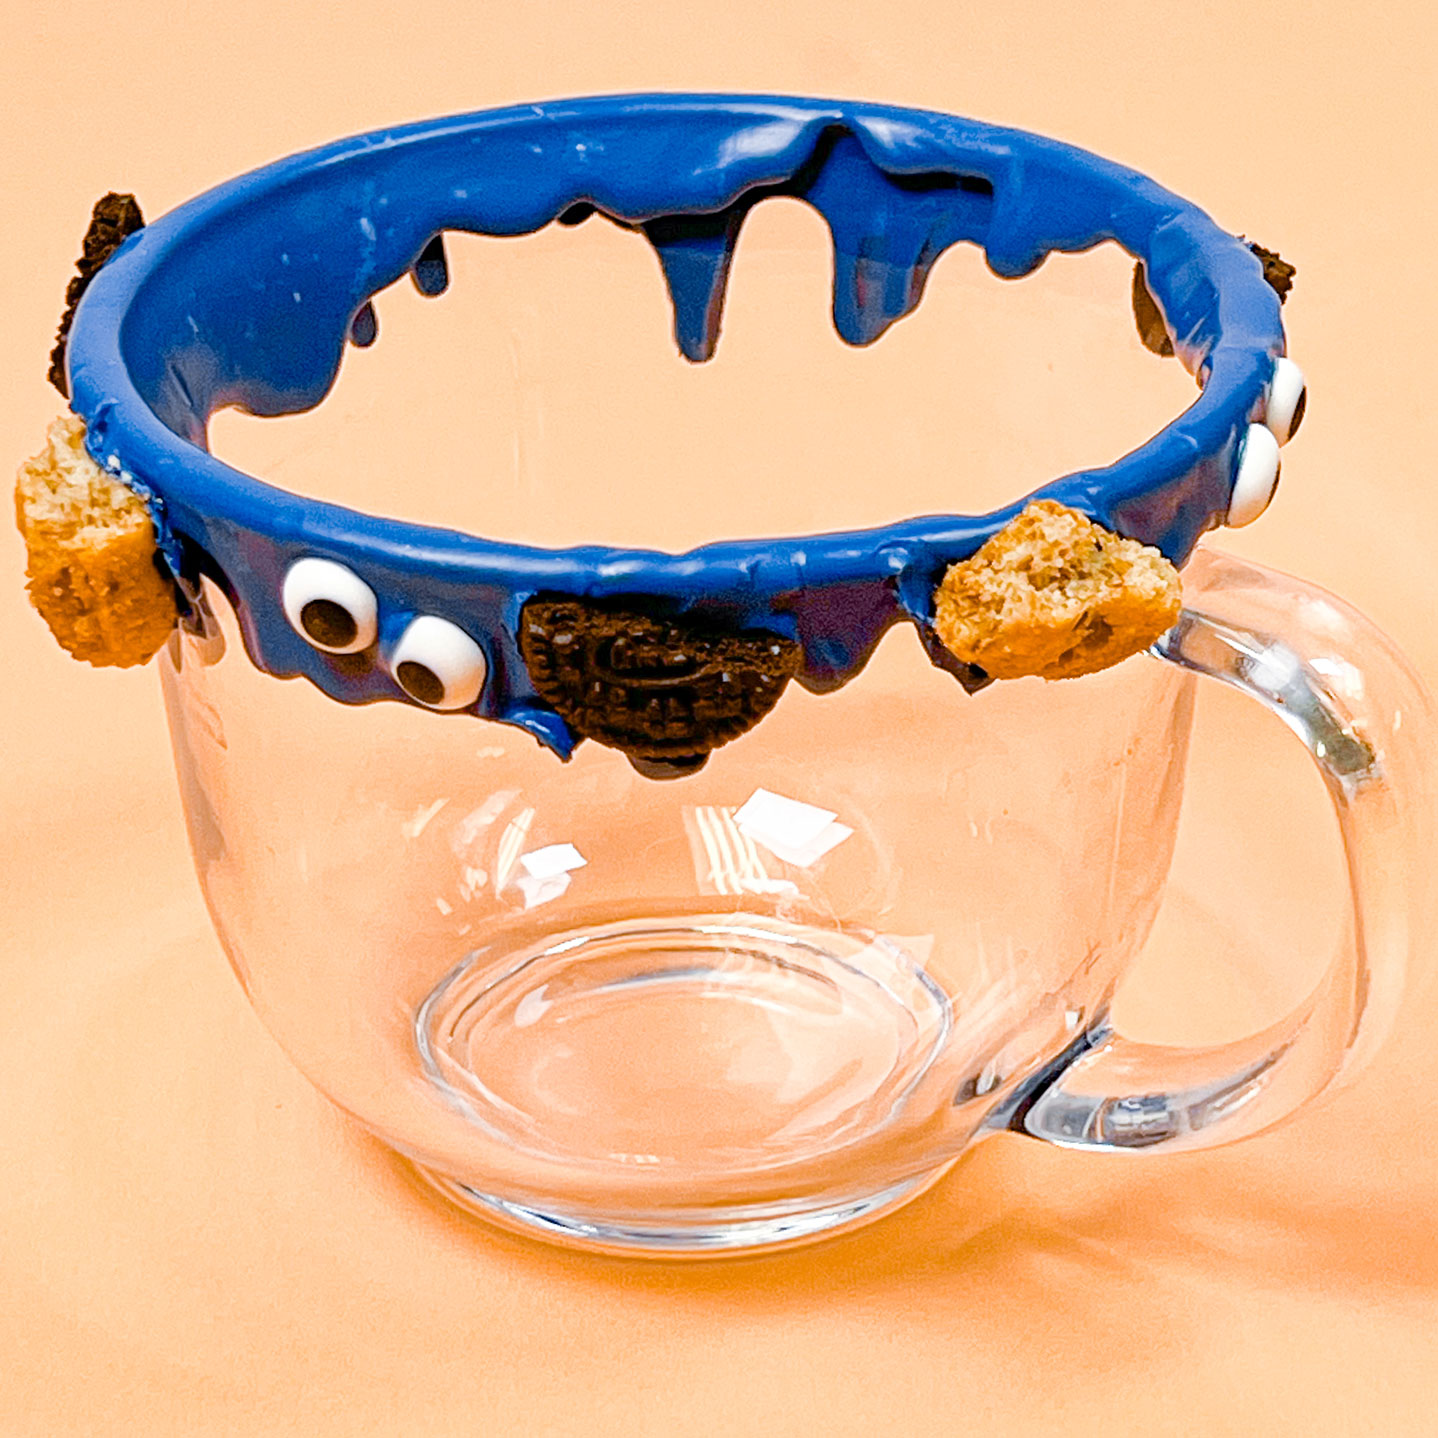 mug with blue chocolate drip decorated with icing eyes and cookie pieces